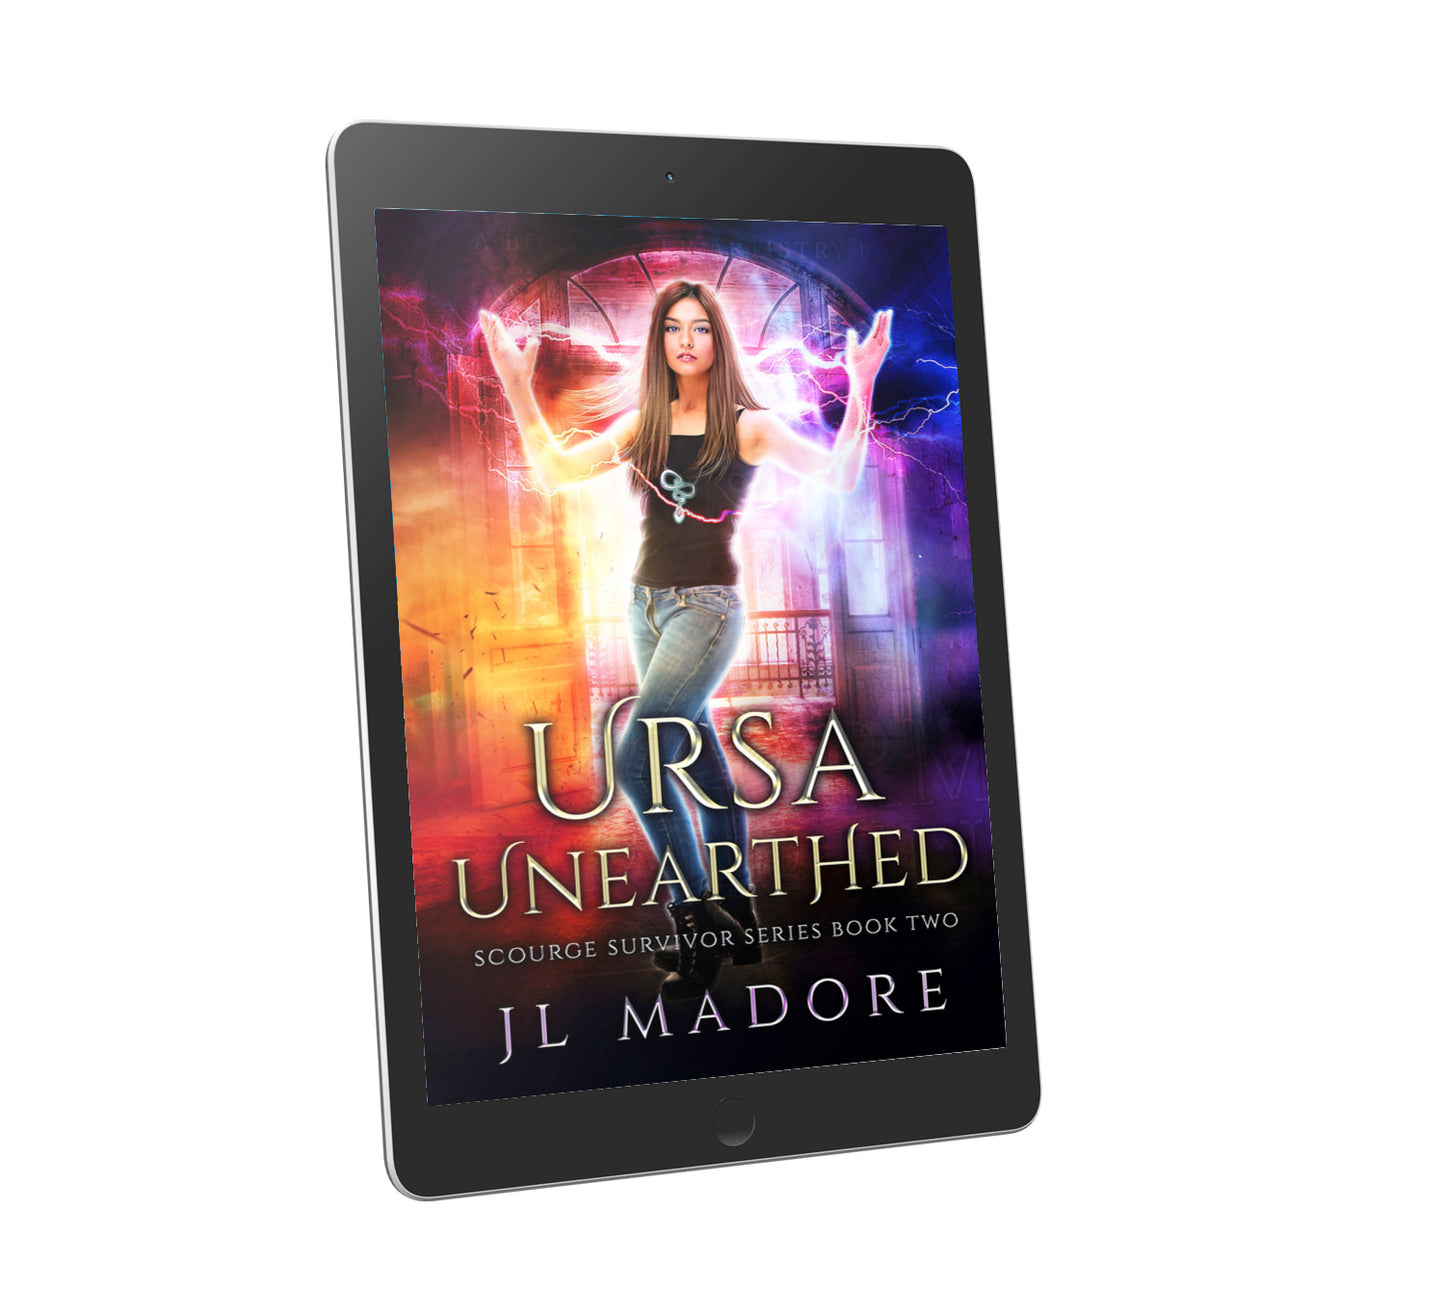 Ursa Unearthed